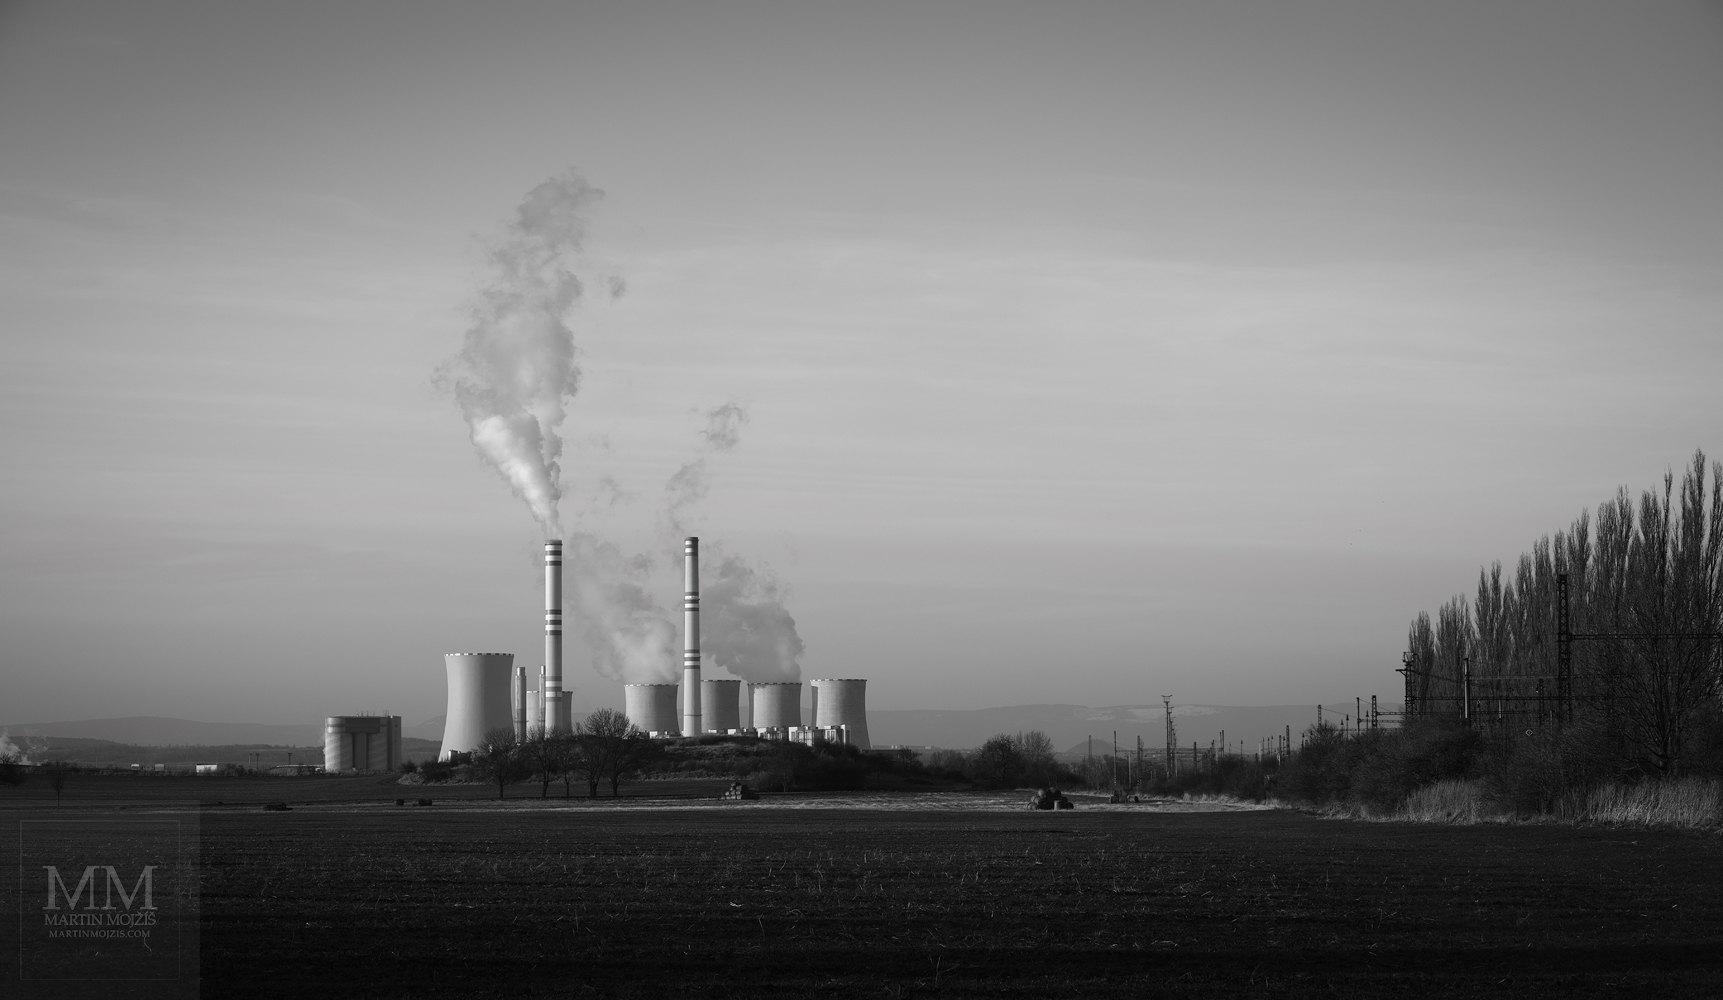 Thermal power plant in the landscape. Fine Art large format black and white landscape photograph LANDSCAPE WITH THE POWER PLANT. Photographer Martin Mojzis.